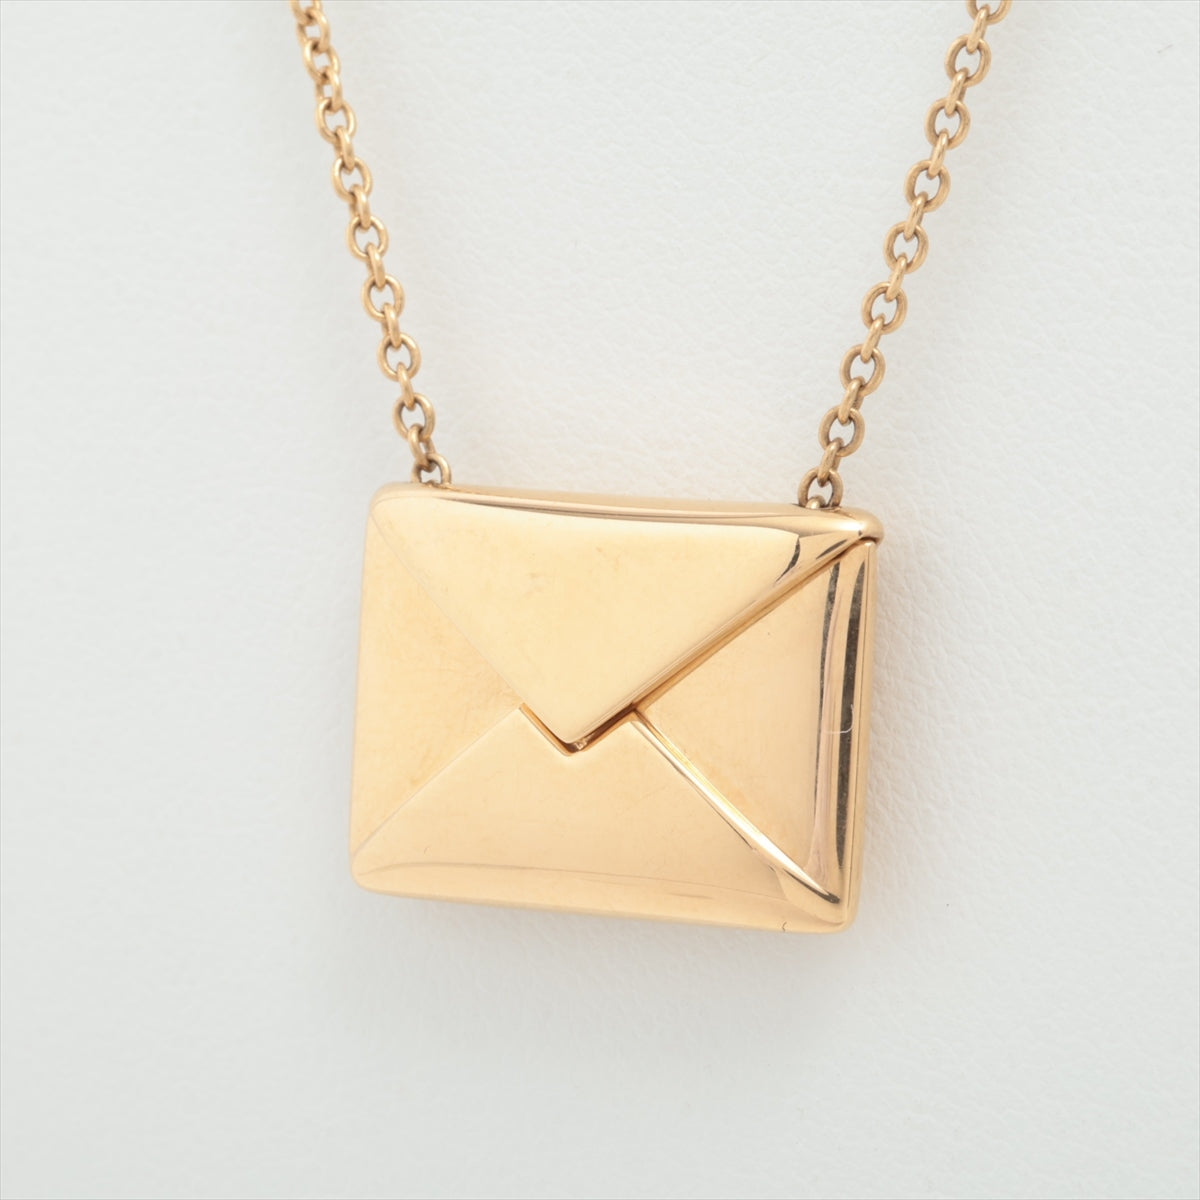 Tiffany Necklace 925×750 11.6g Gold × Silver Suites Nothing envelopes